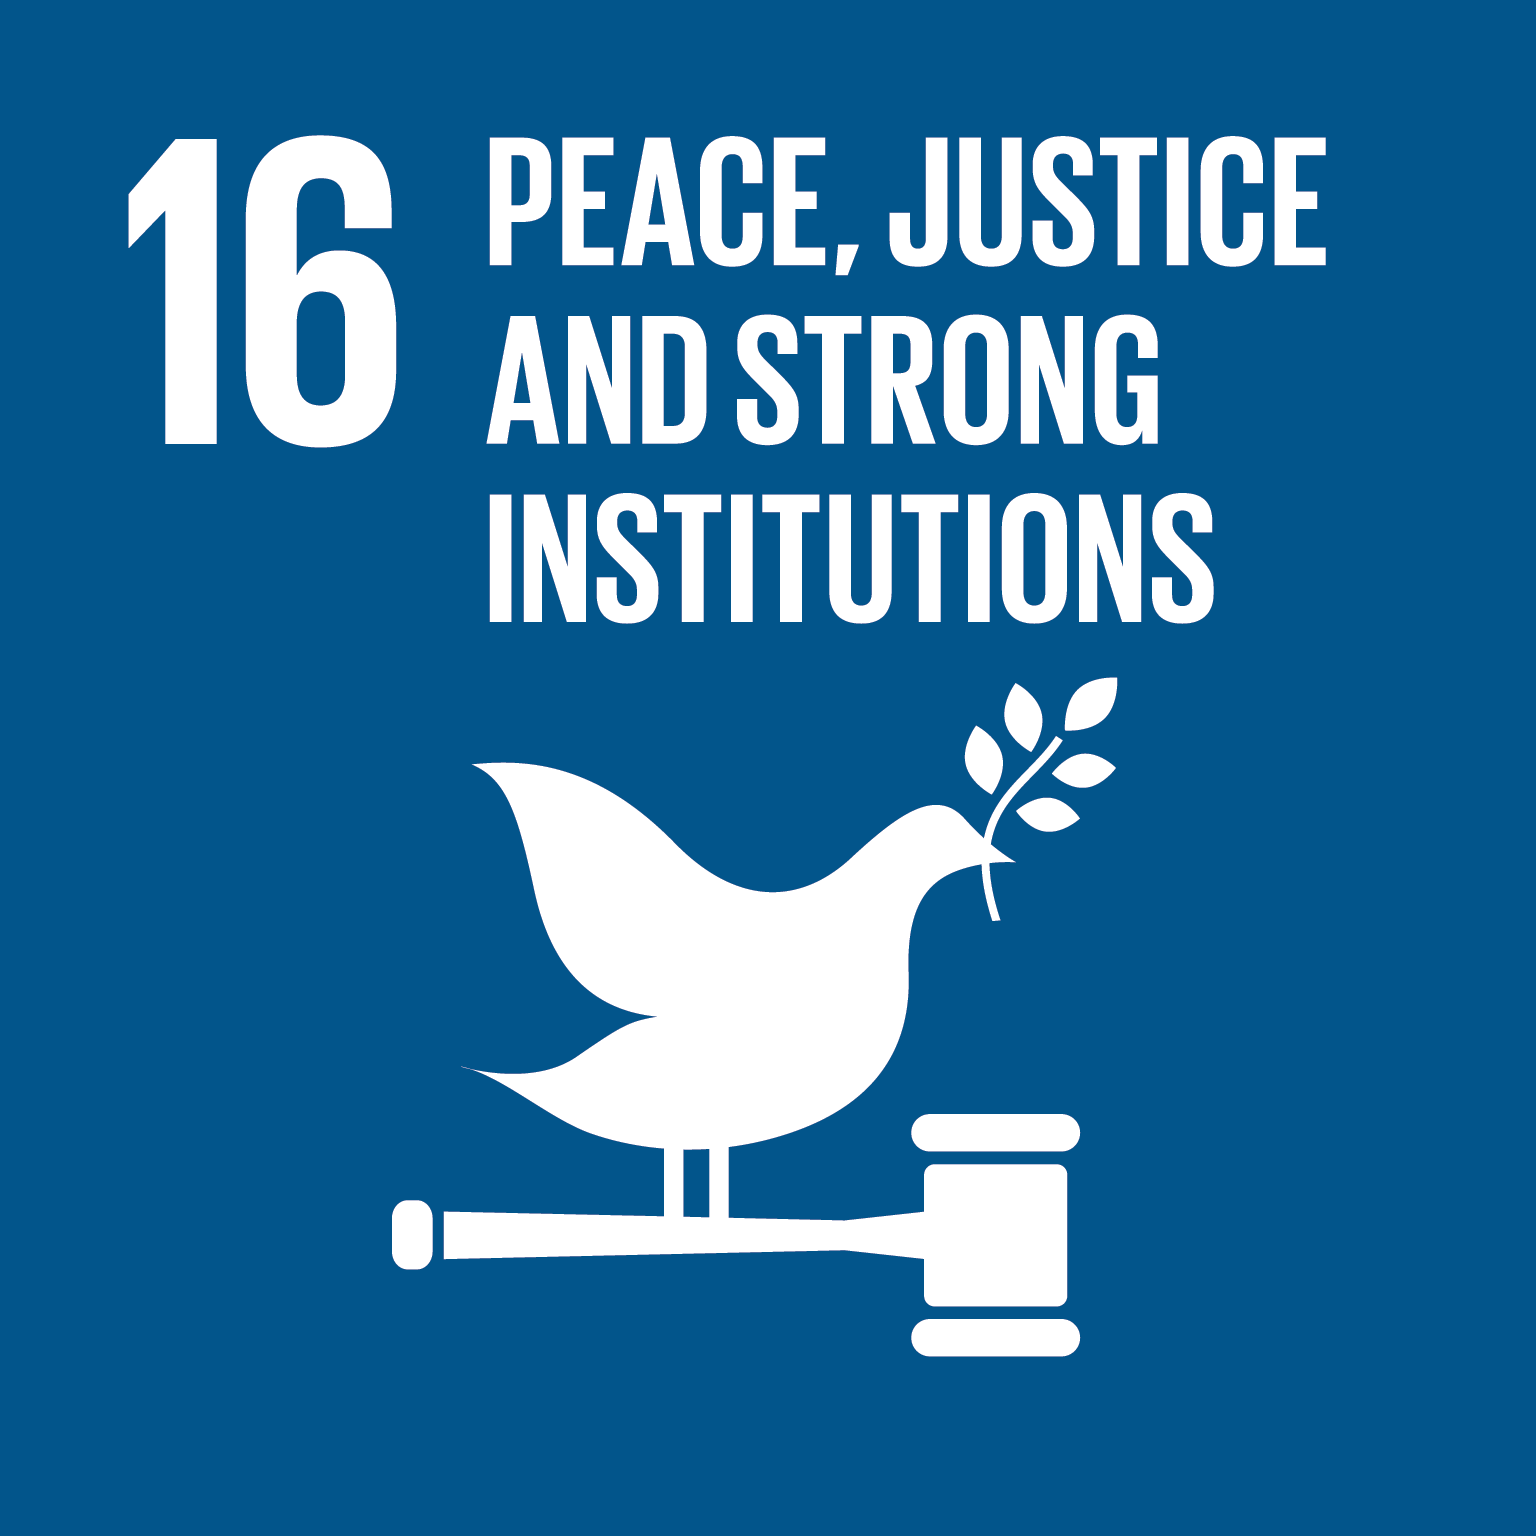 Peace, Justice and strong institutions